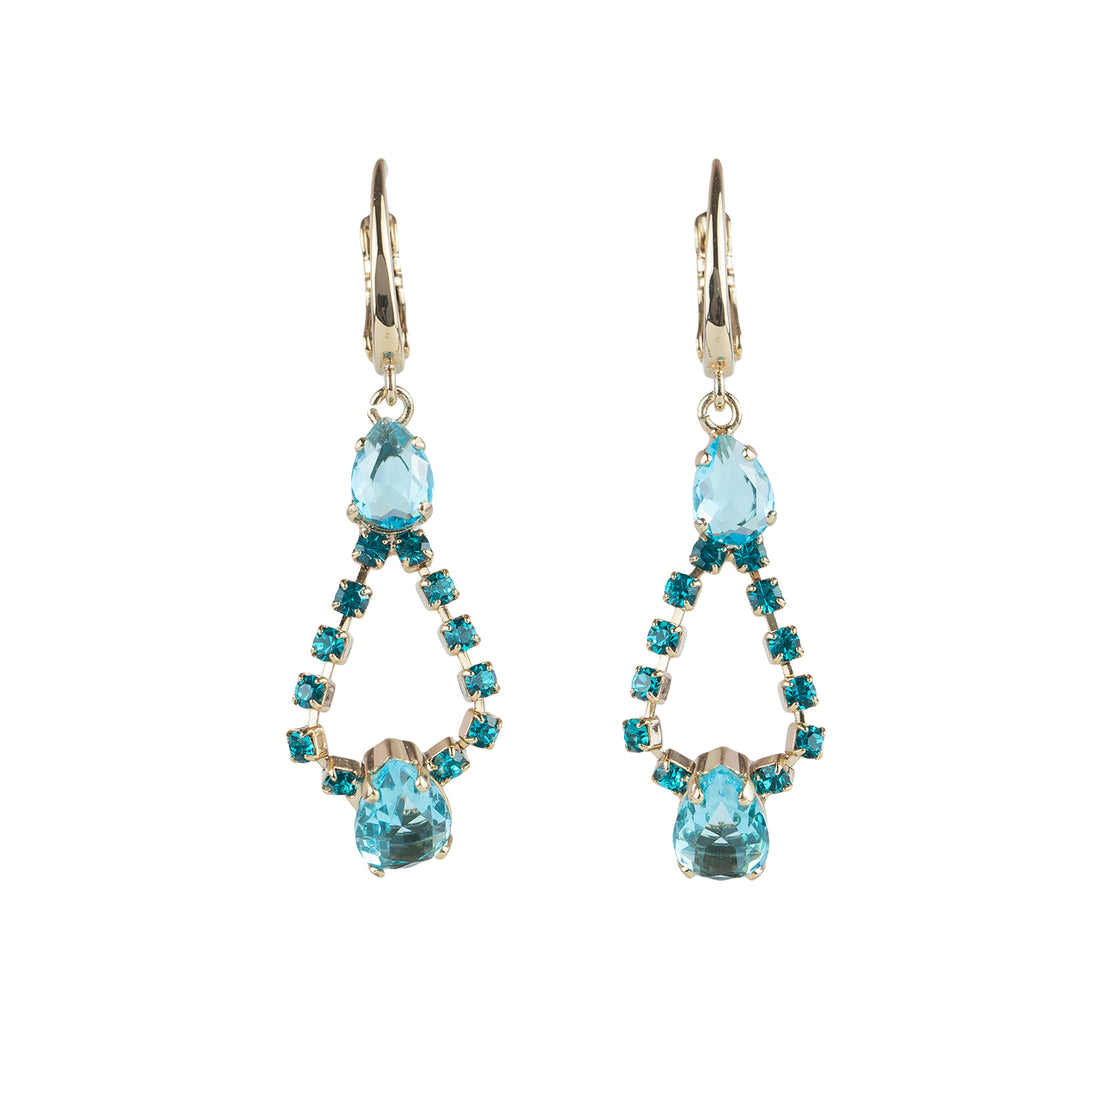 Drop earrings with crystals